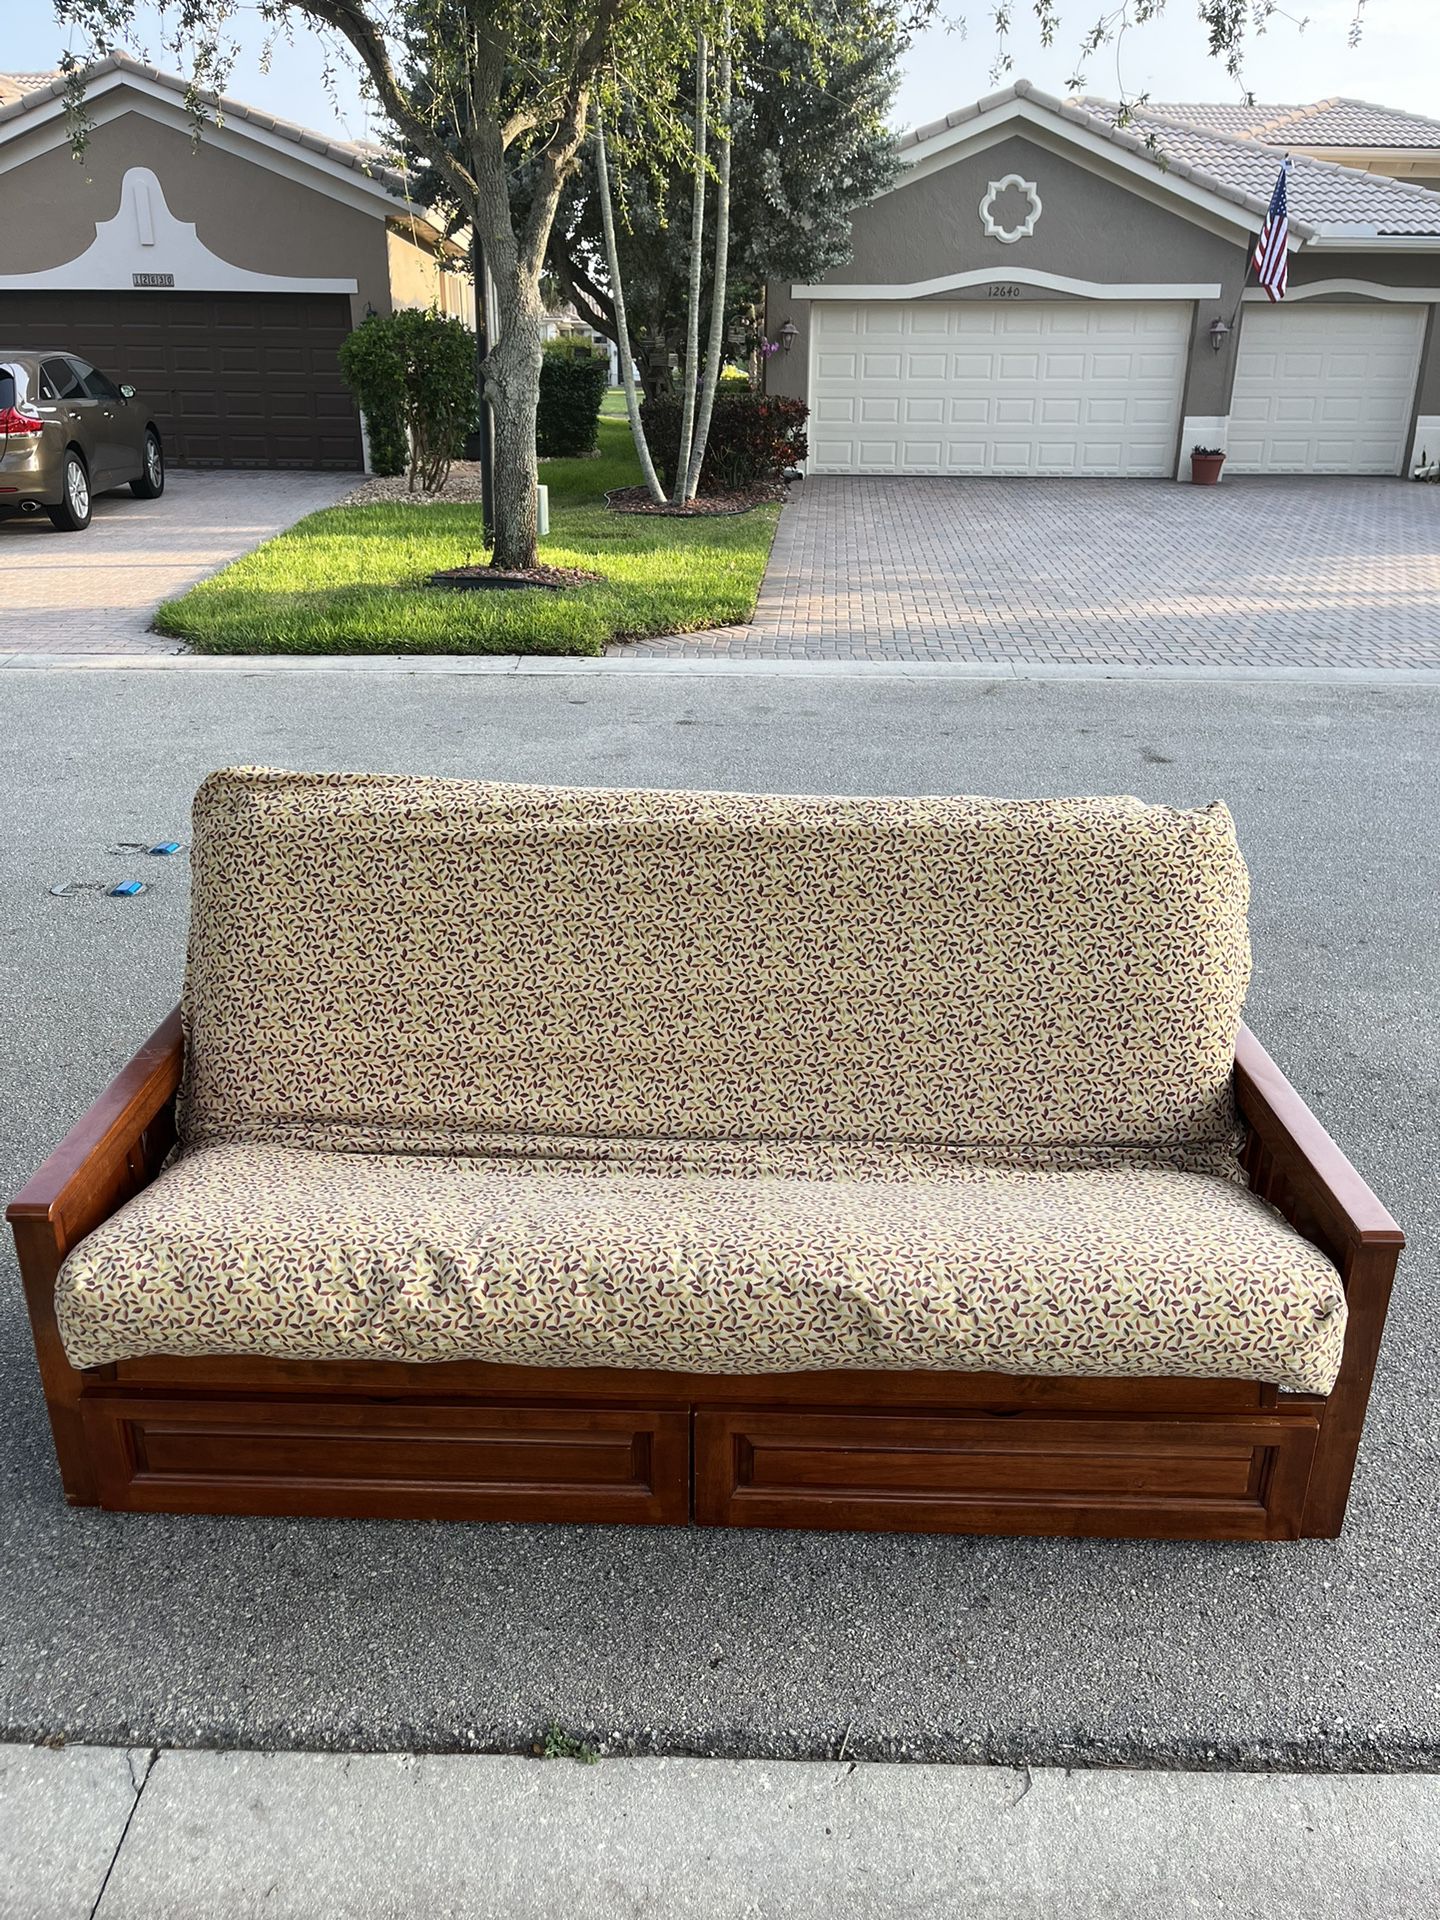 Pull-out Couch